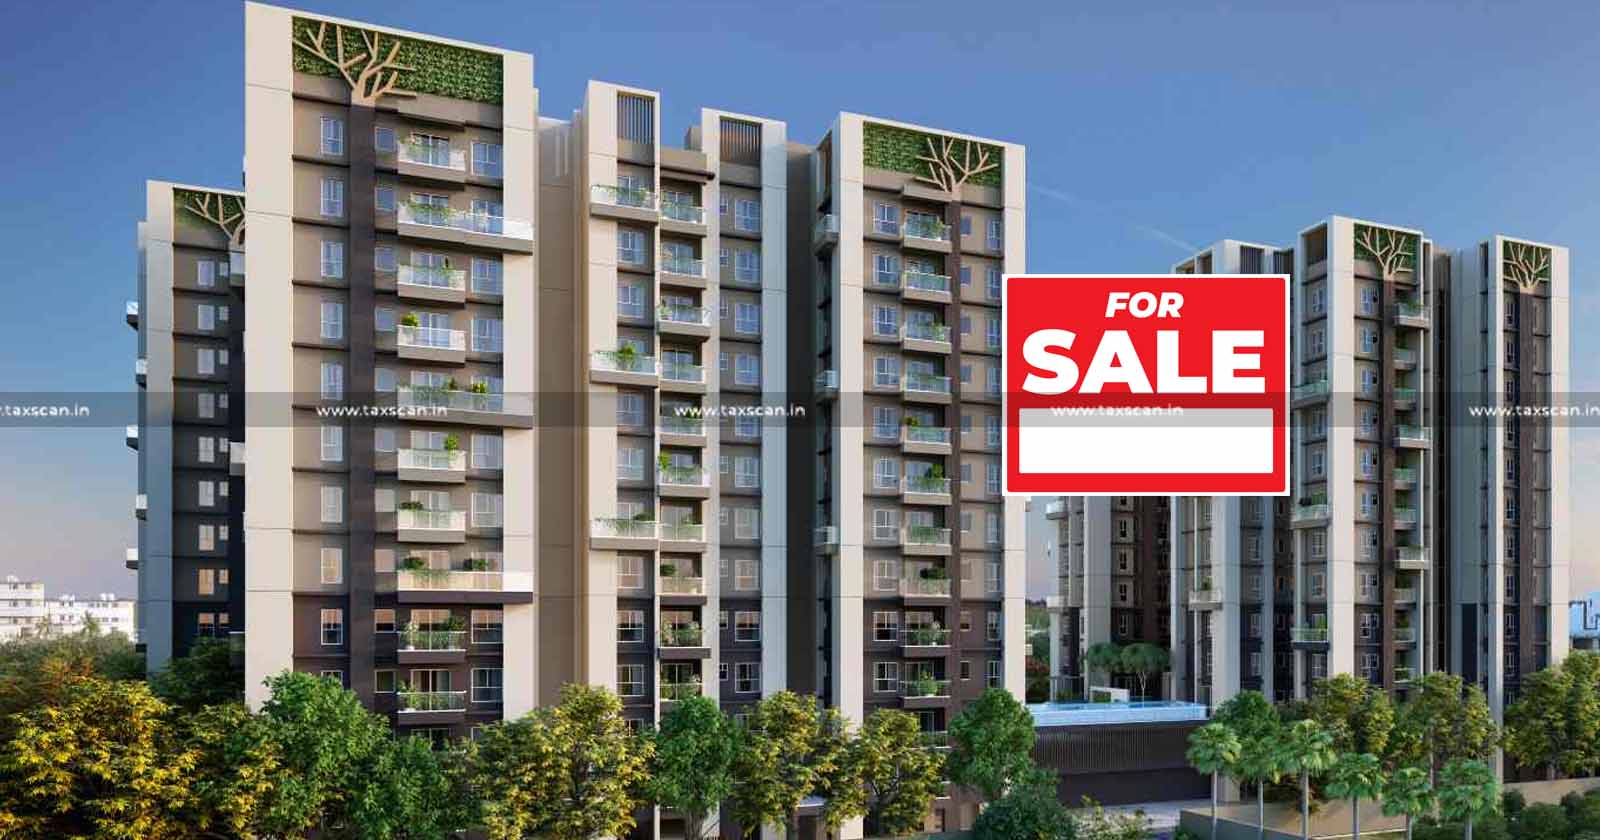 Income from Sale of Residential Flats - Sale of Residential Flats - Joint Development Agreement - Capital Gain - Business Income - Income - ITAT - taxscan